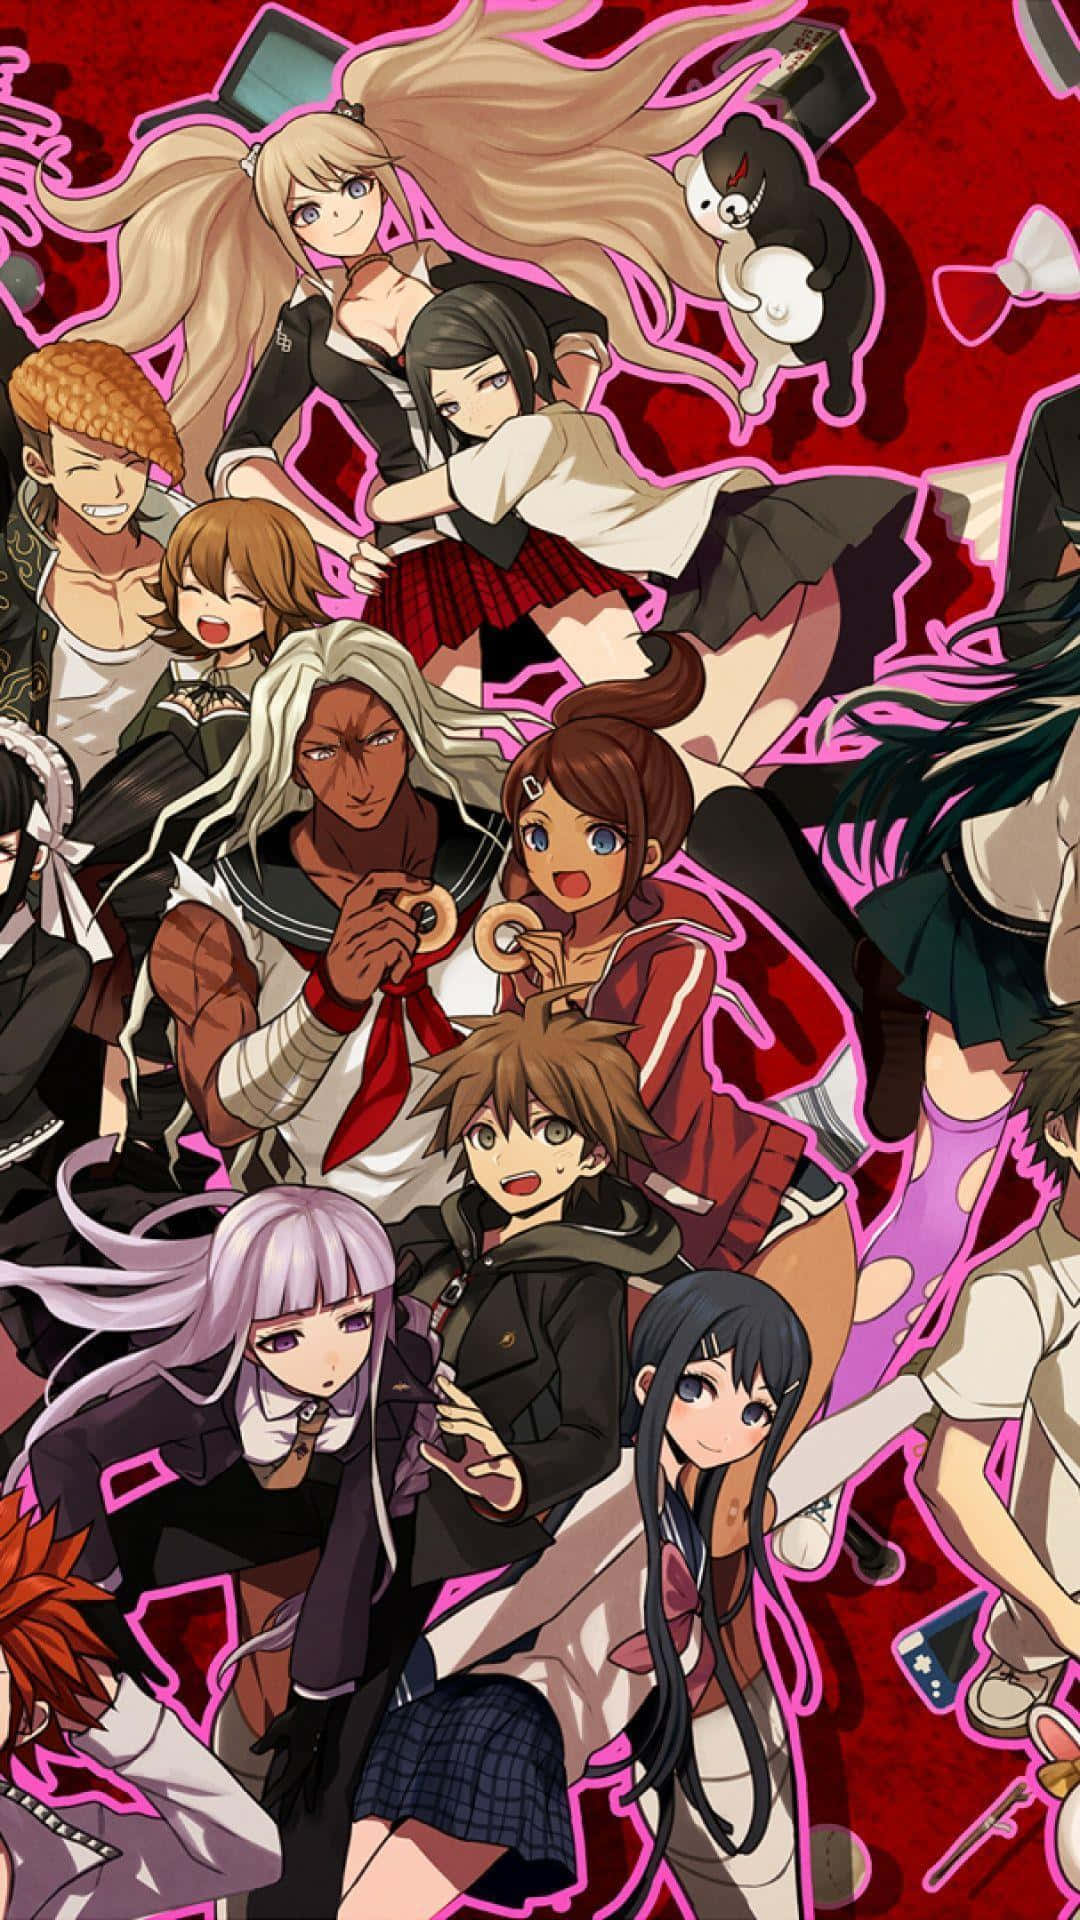 Prepare for a thrilling journey - Join the students of Hope's Peak Academy in Danganronpa.